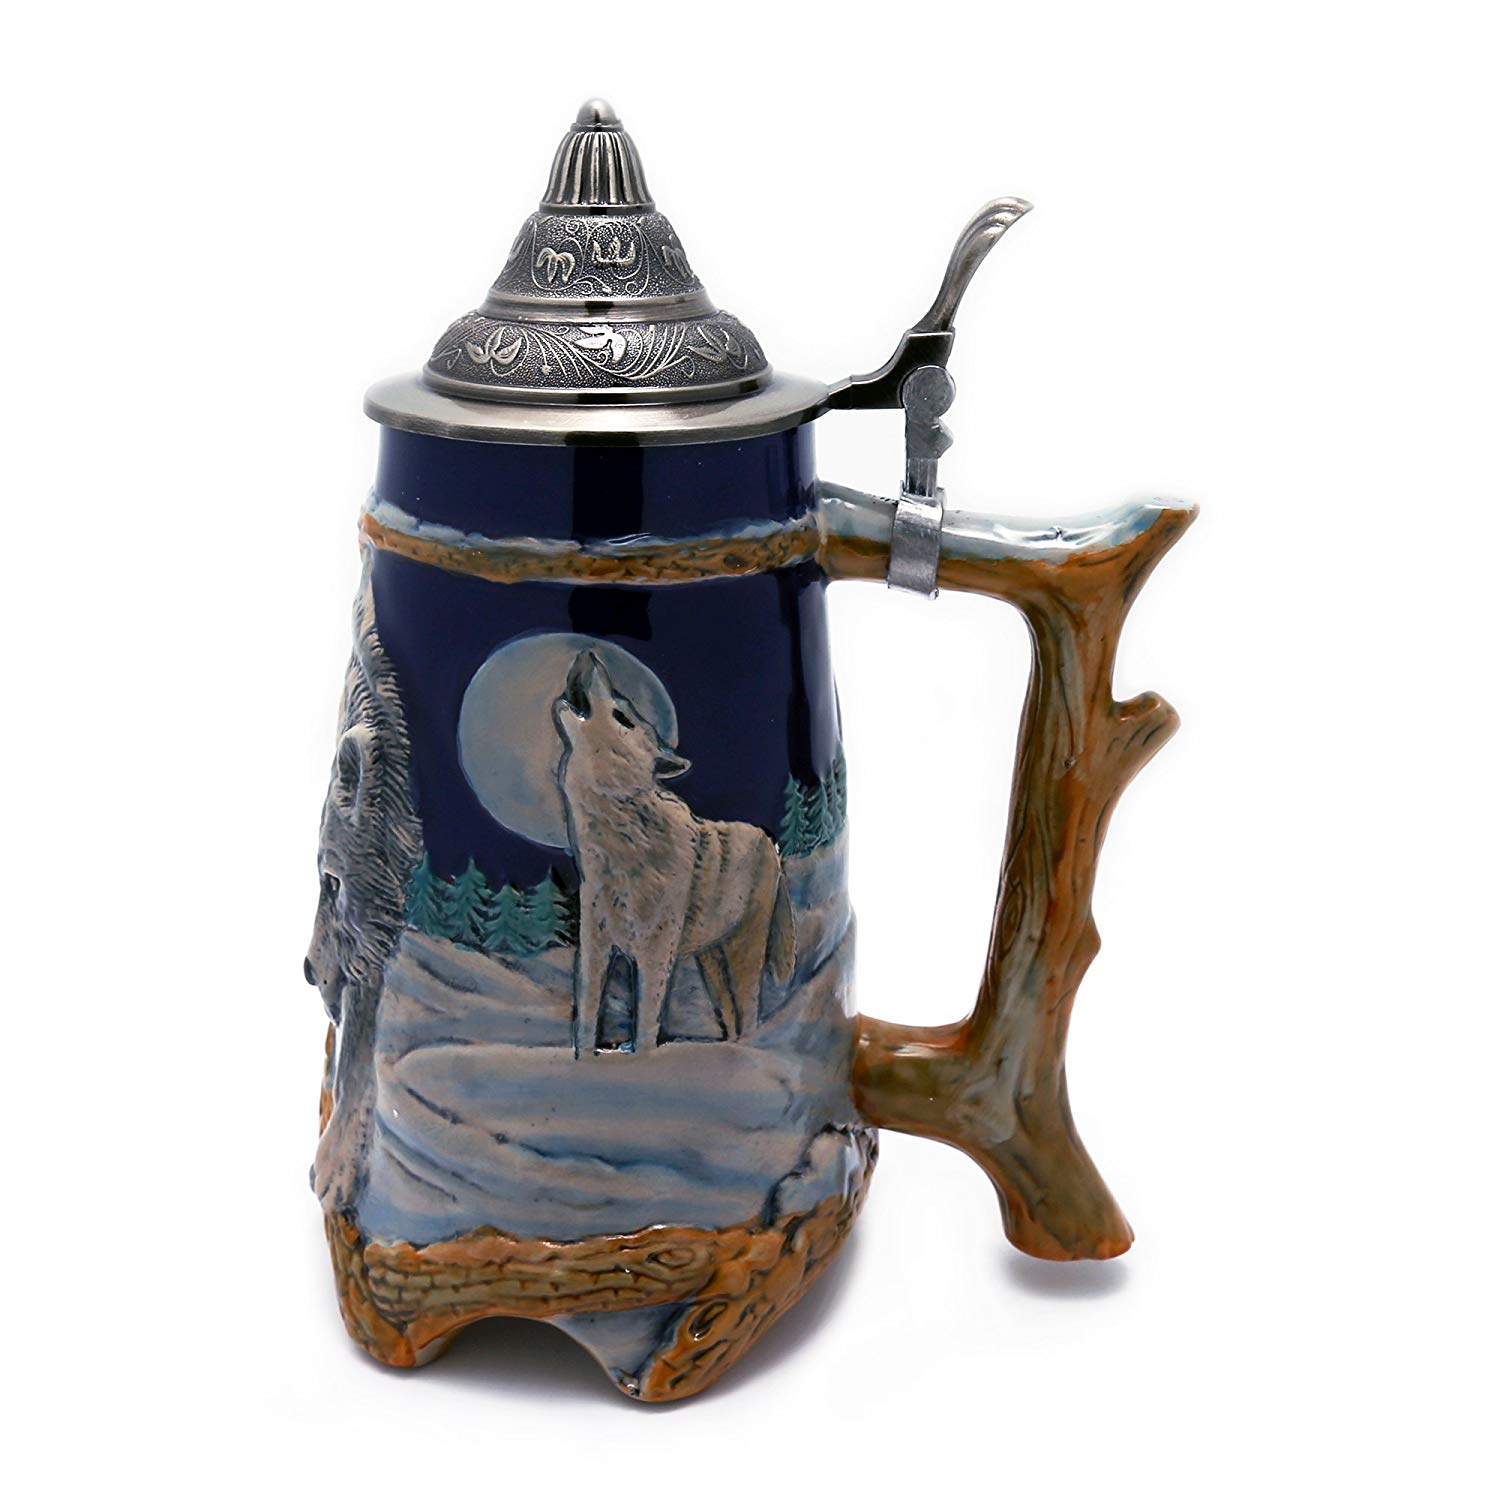 TransSino Treasures 0.95 Liter Engraved Beer Stein with Relief Wolf Image.jpg  by TransSinoTreasures